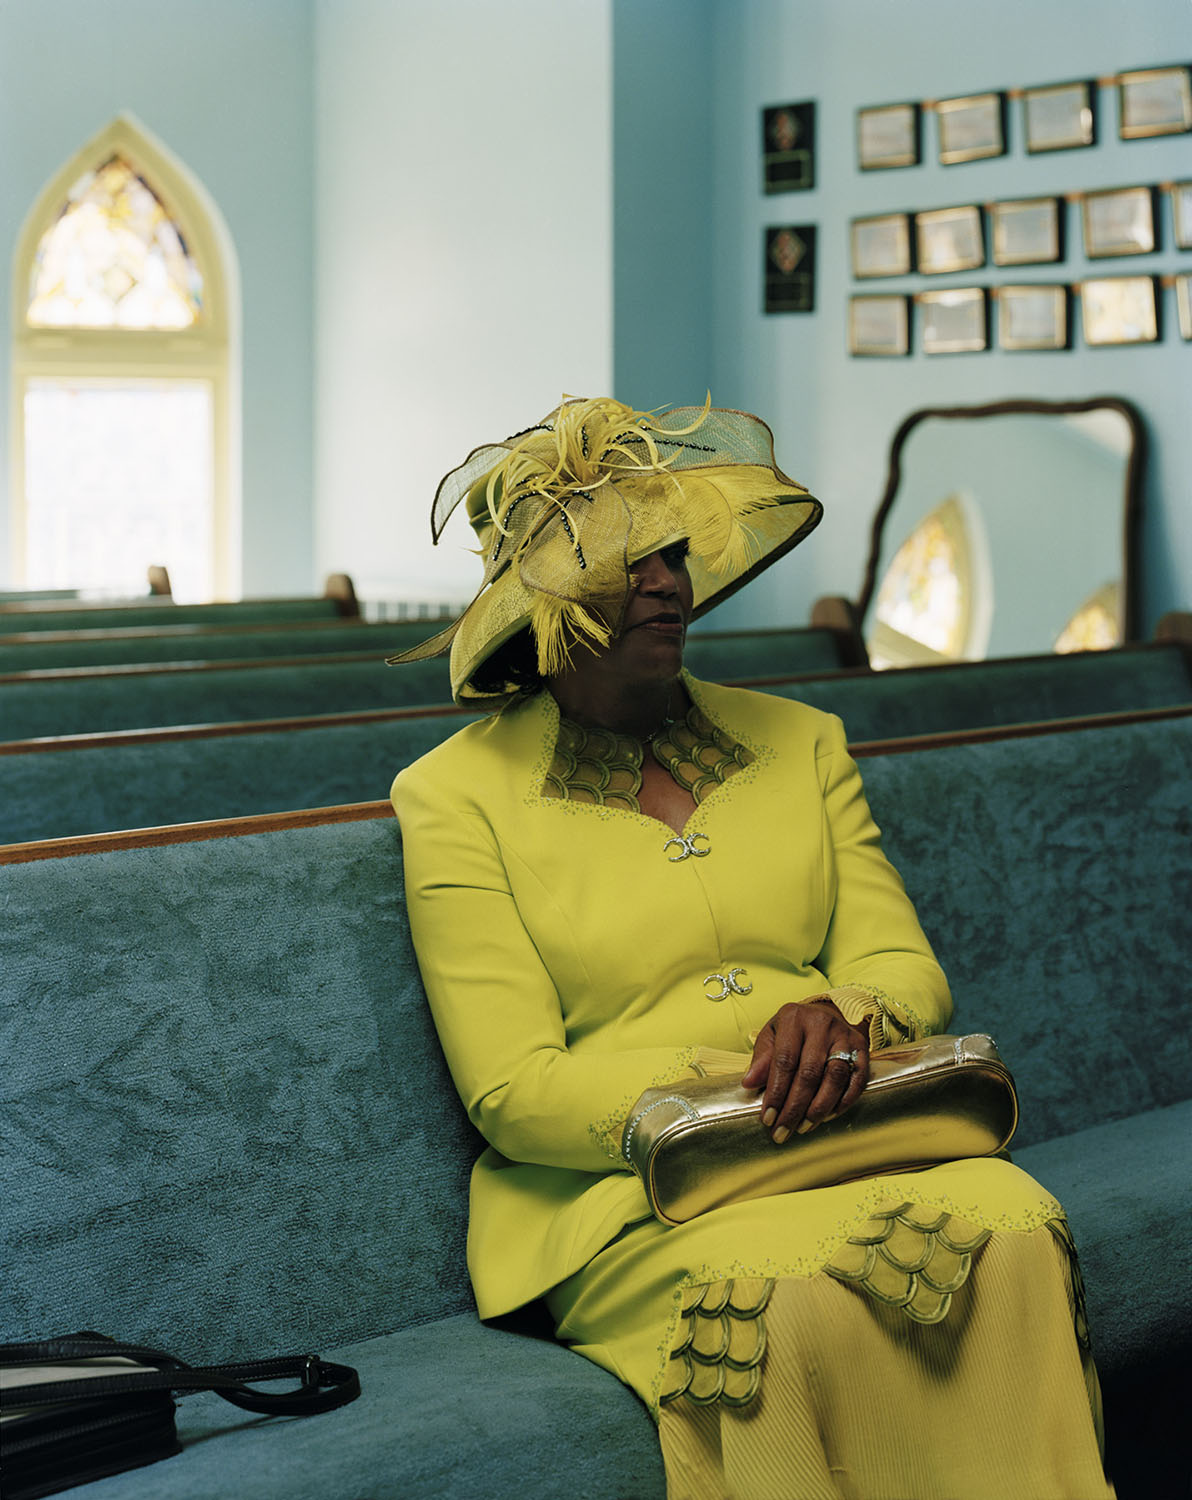 Paul D’Amato, First Lady of the Garfield Baptist Church, 2008. Pigment print. Courtesy of the artist and Stephen Daiter Gallery, Chicago